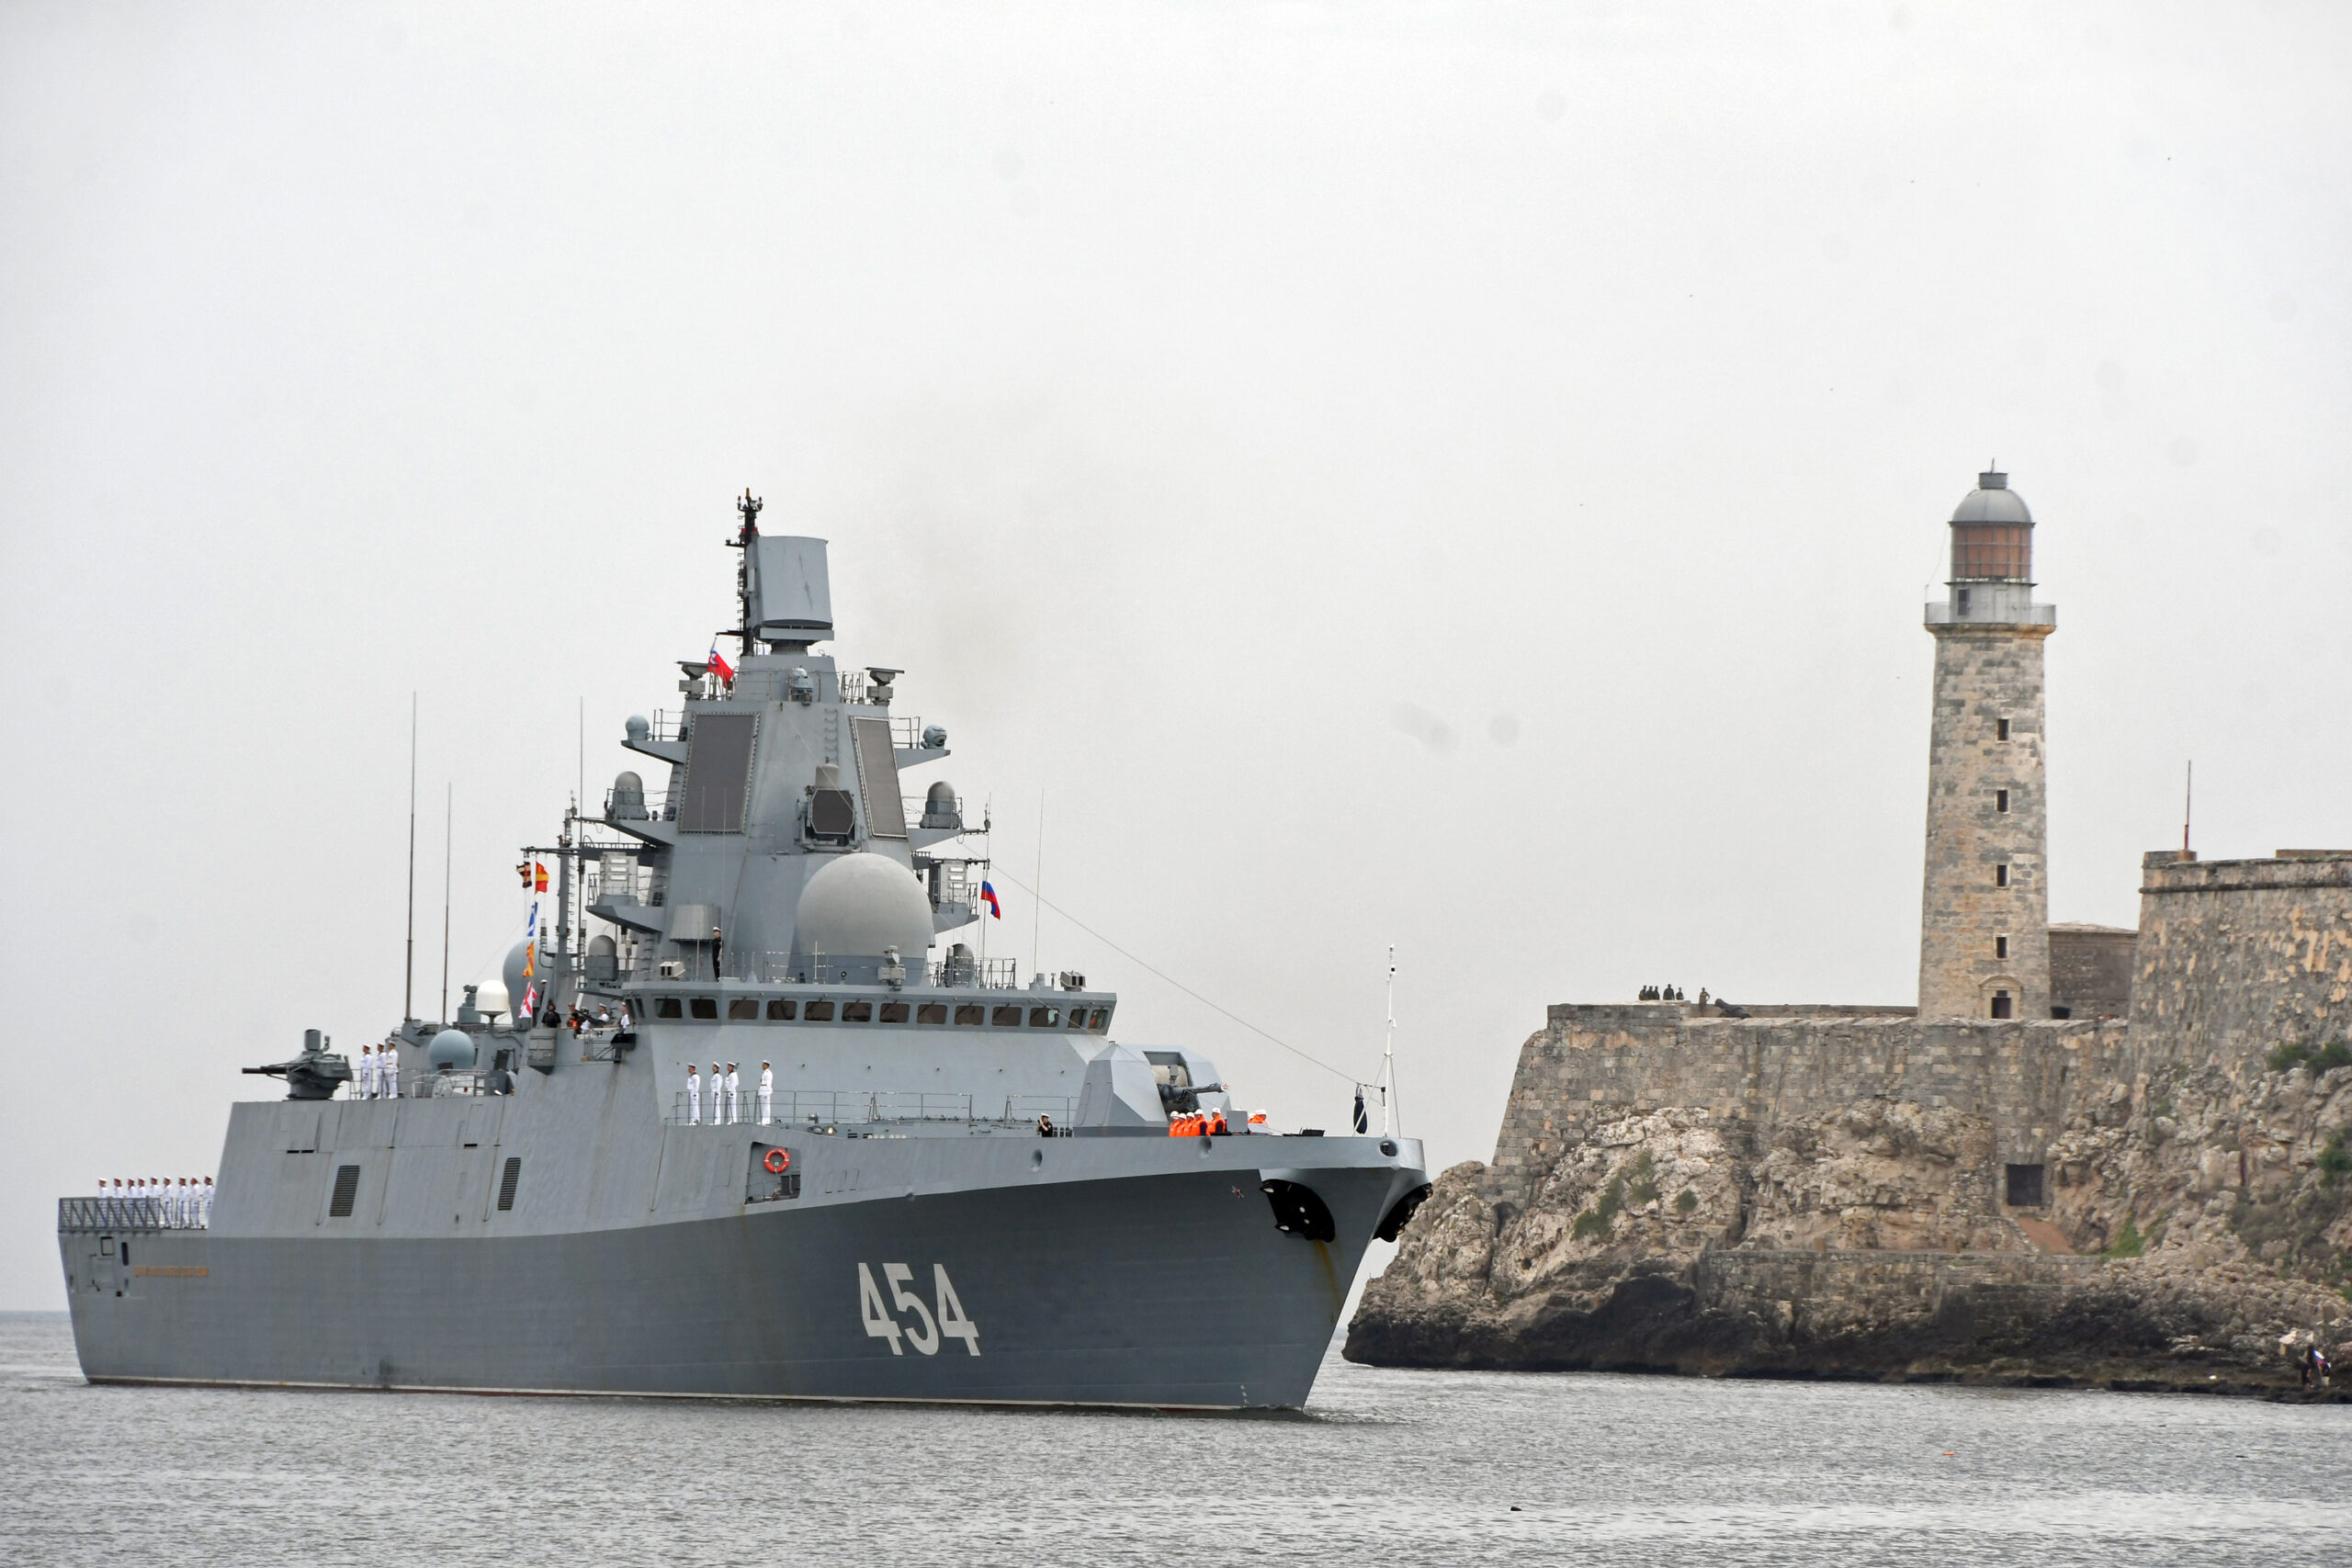 Russia’s warships in Cuba are more than a tit-for-tat for Biden’s support for Ukraine